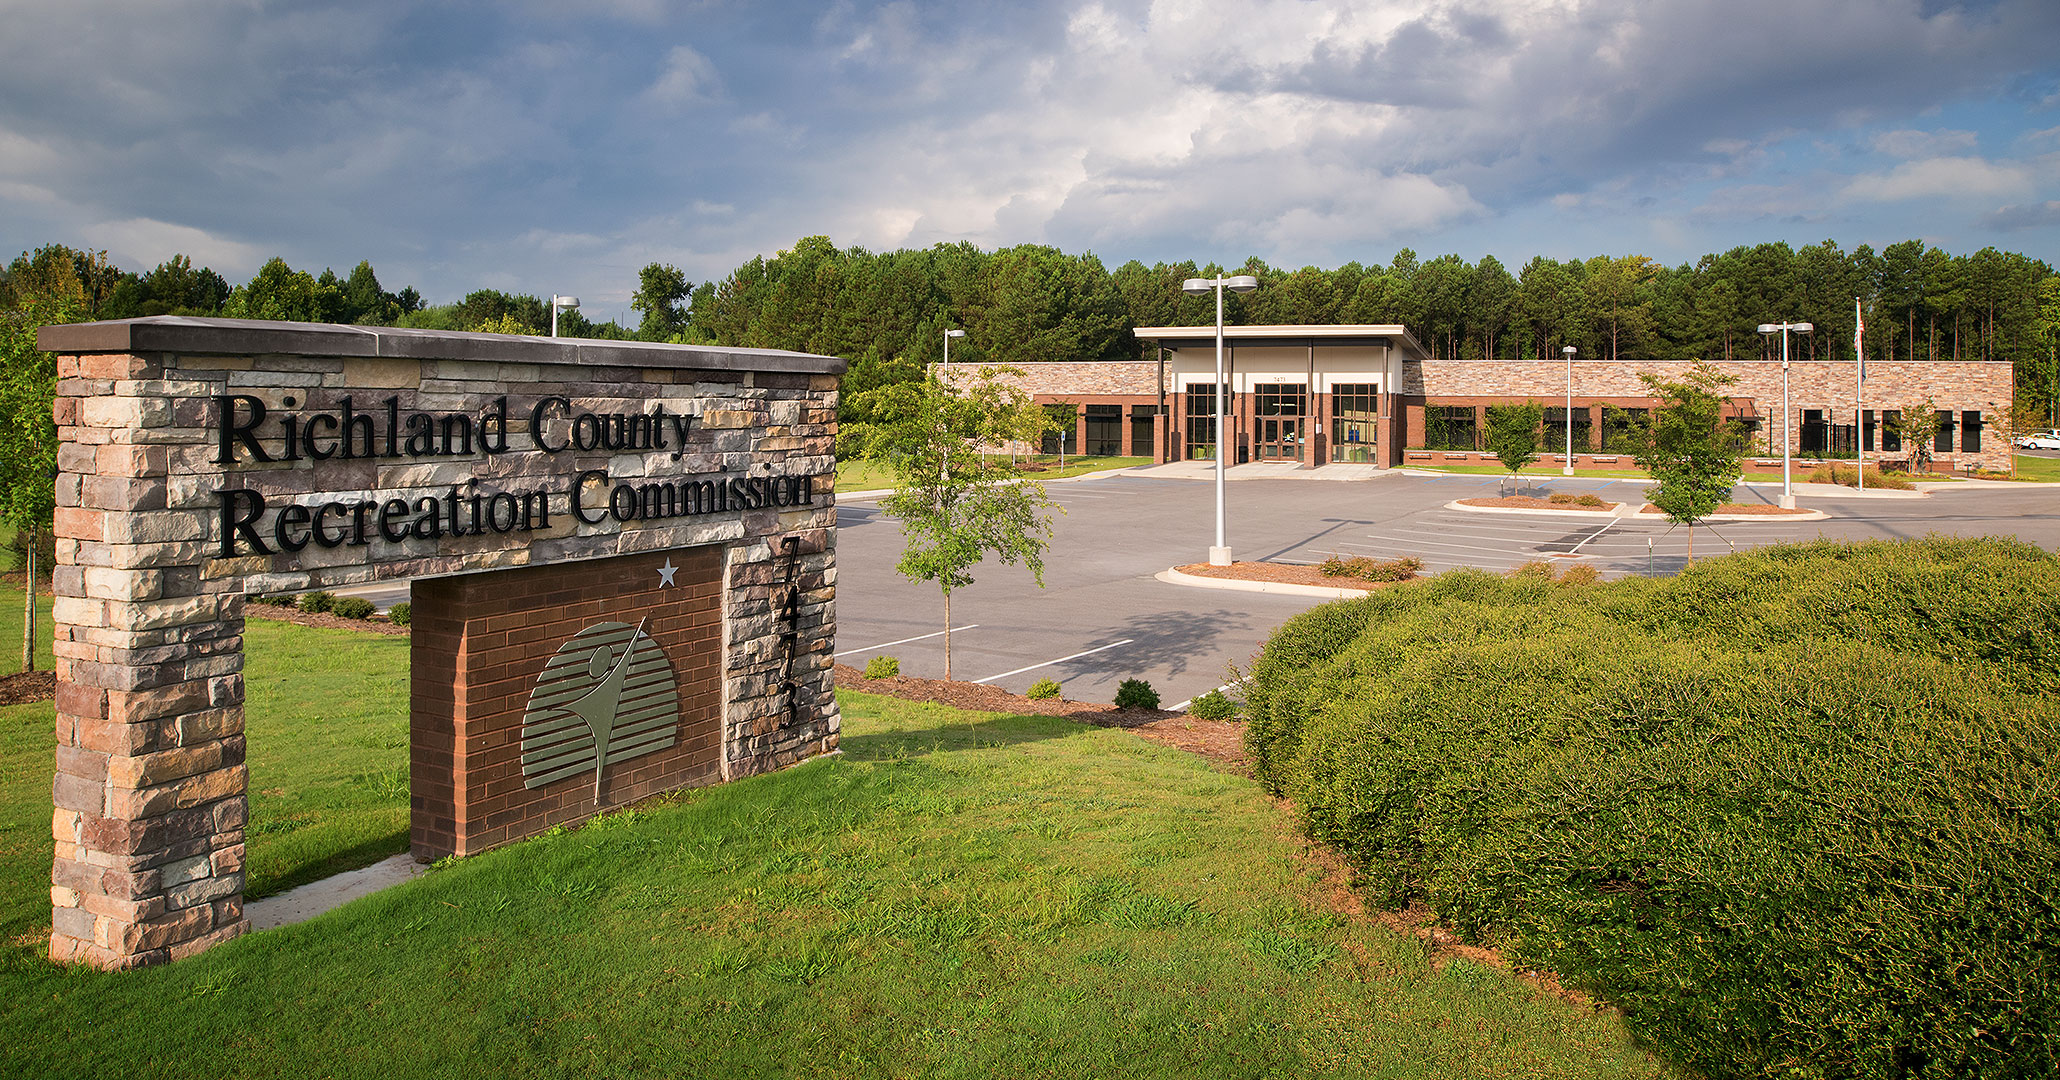 Boudreaux architects worked with the Richland County Recreation Commission to design a cohesive look to the RCRC Headquarters.